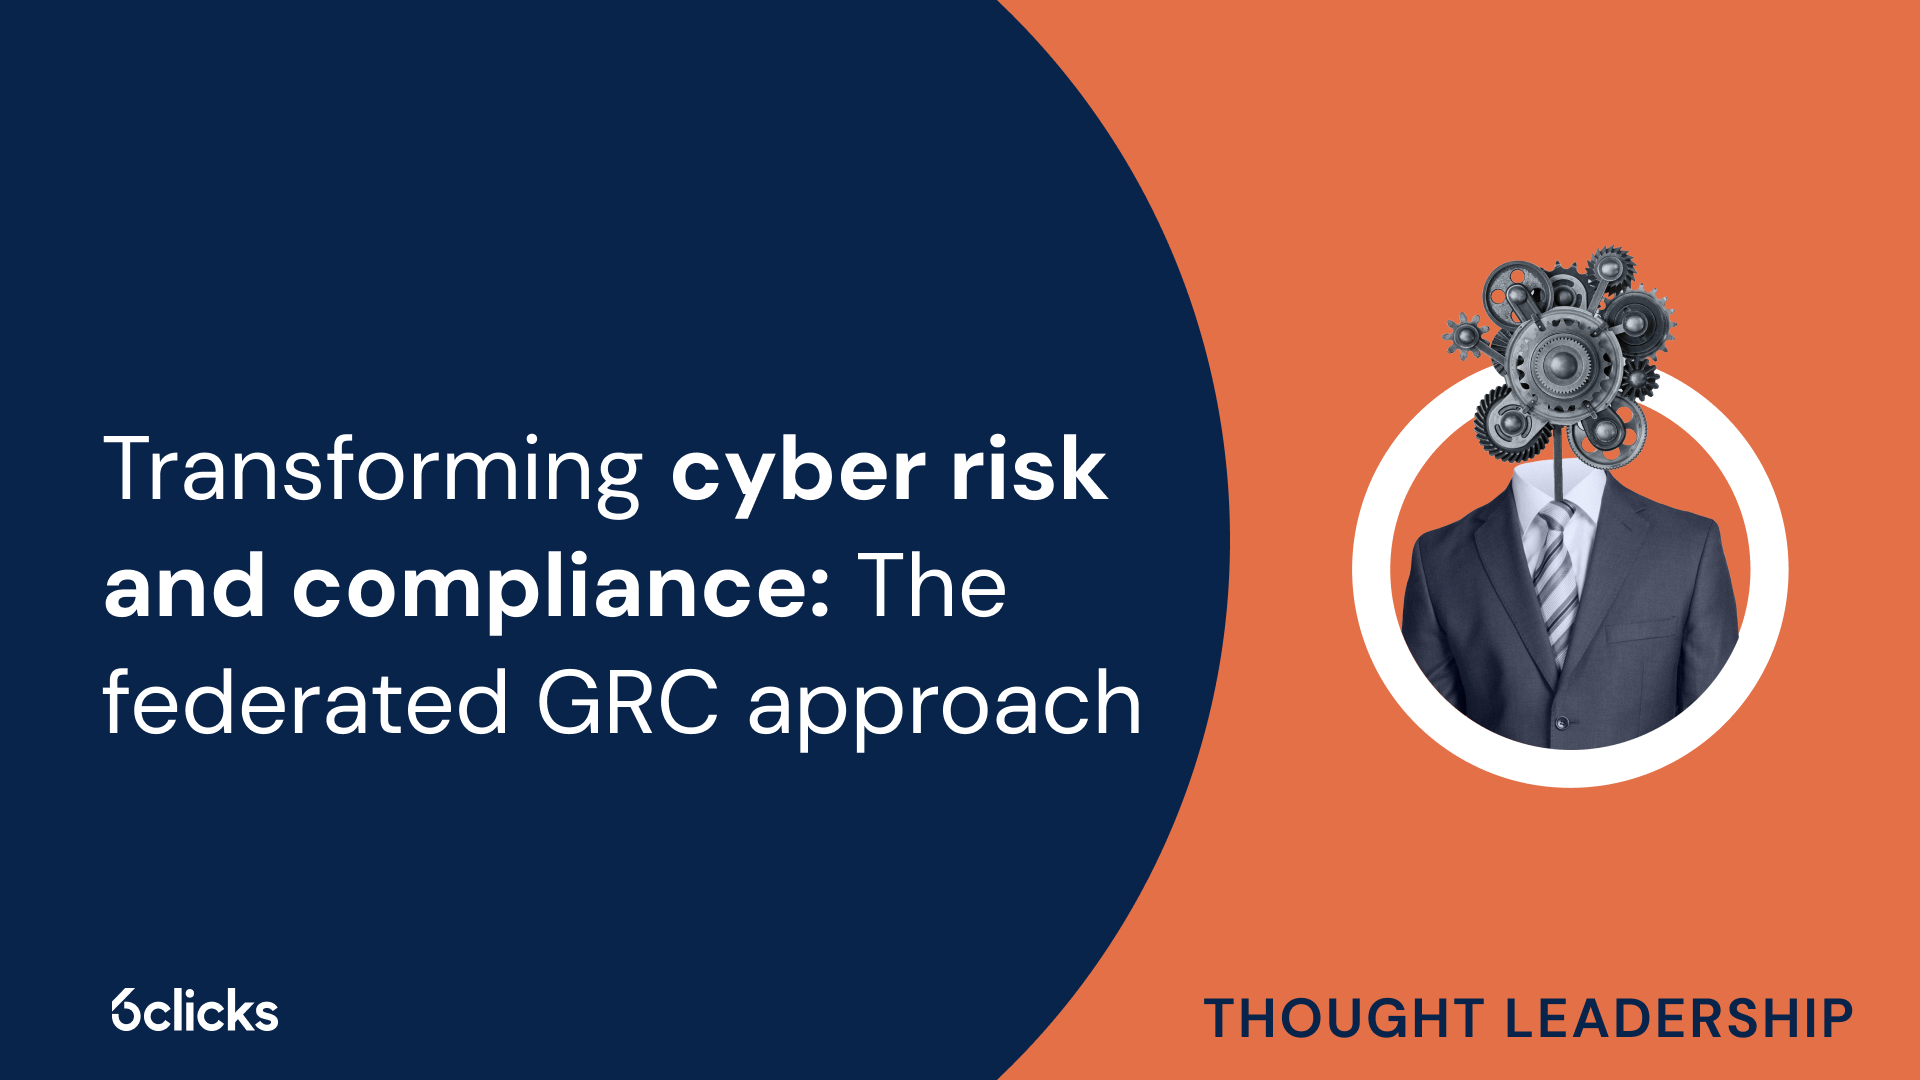 Transforming cyber risk and compliance: The federated GRC approach